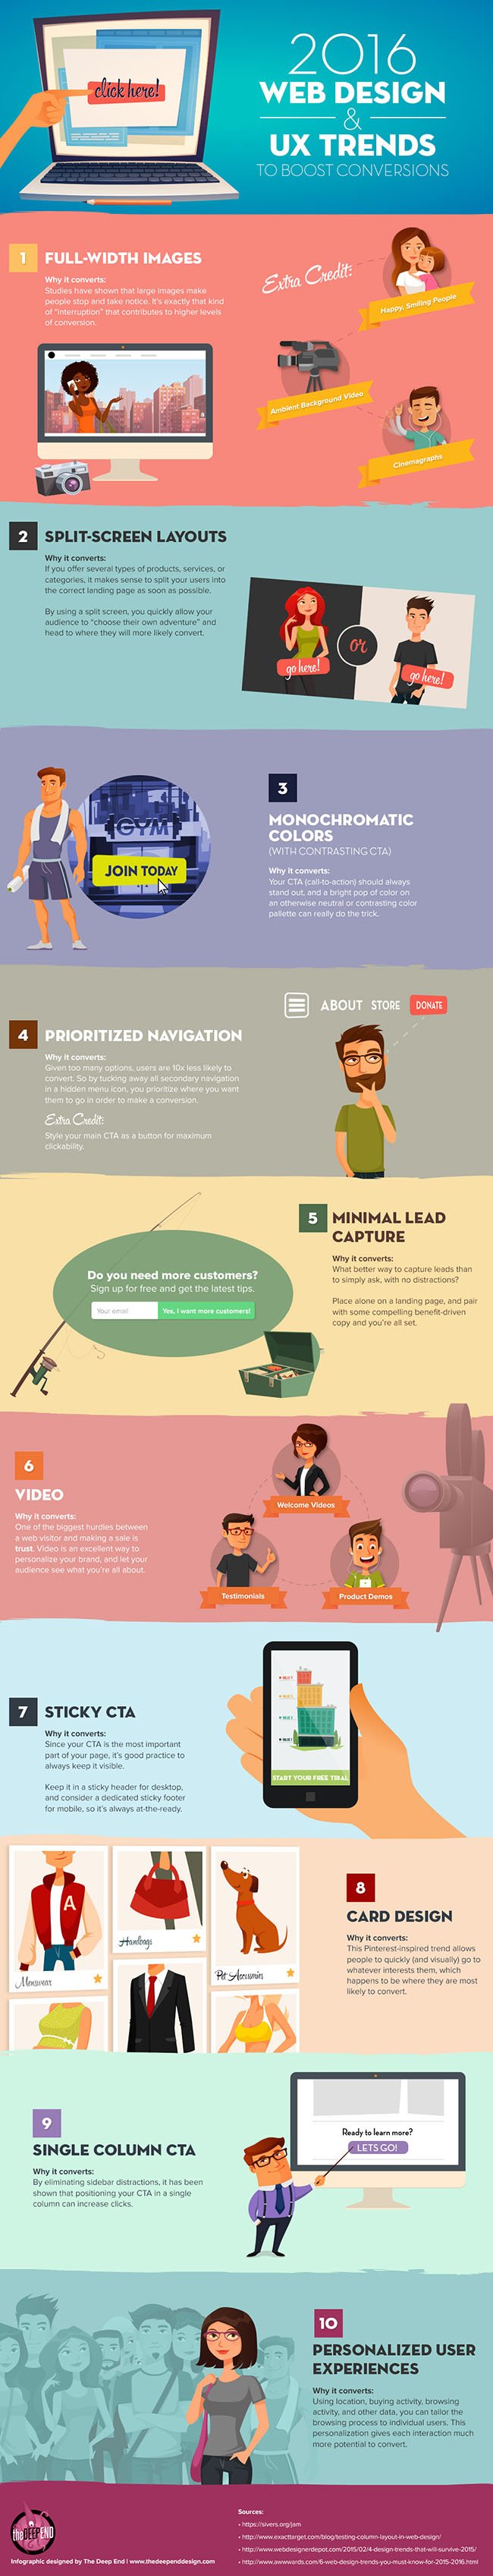 landing page trends infographic.jpg